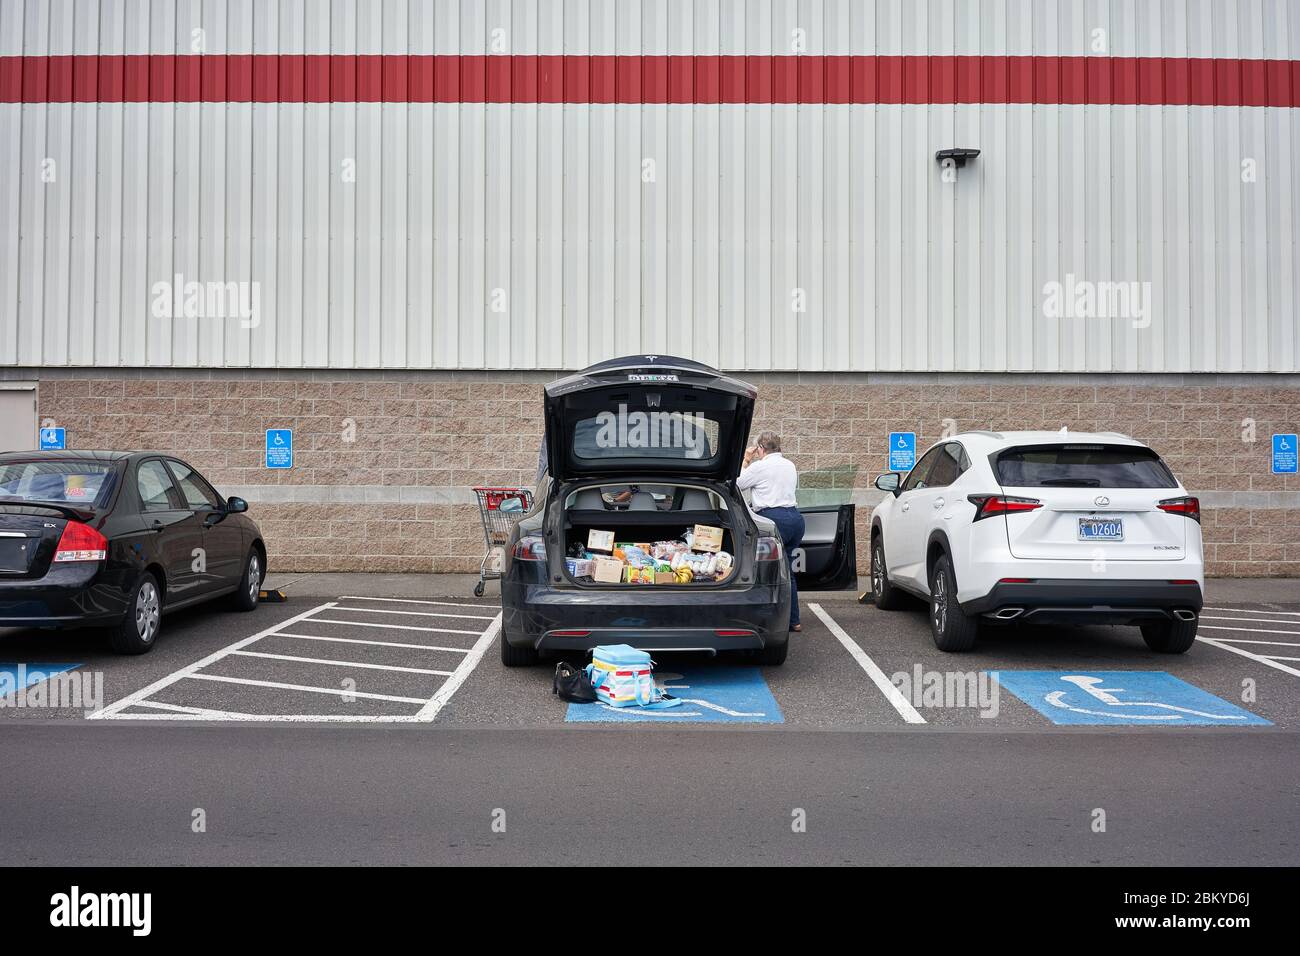 Shoppers load their car after shopping in a Costco warehouse store in Tigard, Oregon, during the coronavirus pandemic, on Tuesday, May 5, 2020. Stock Photo